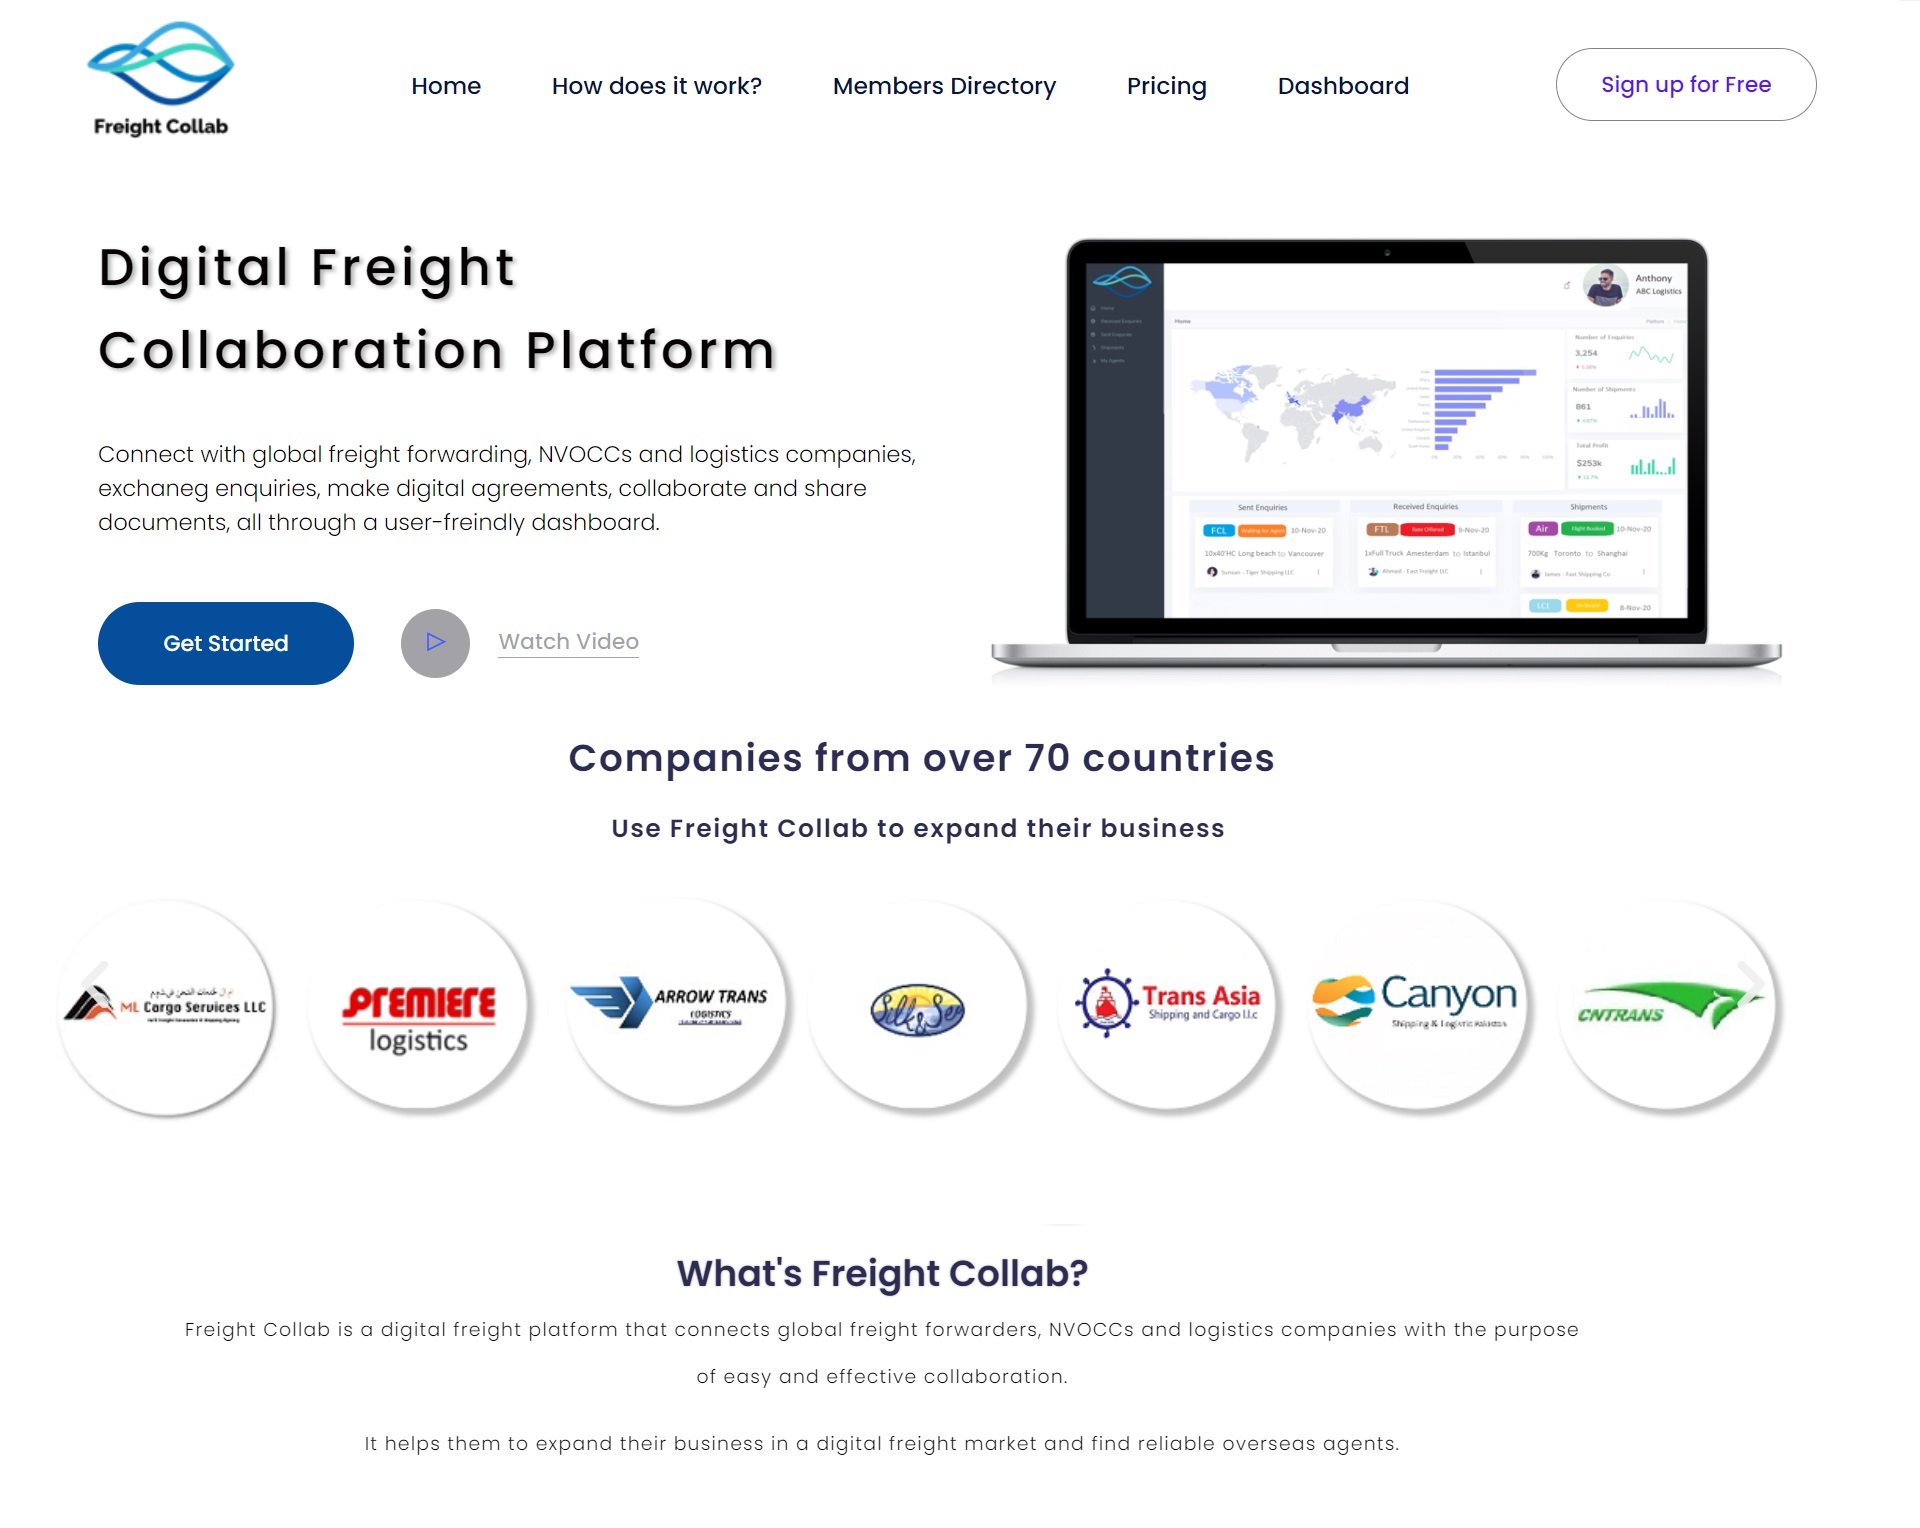 
Freight Collab (The Digital Freight Collaboration Platform)

